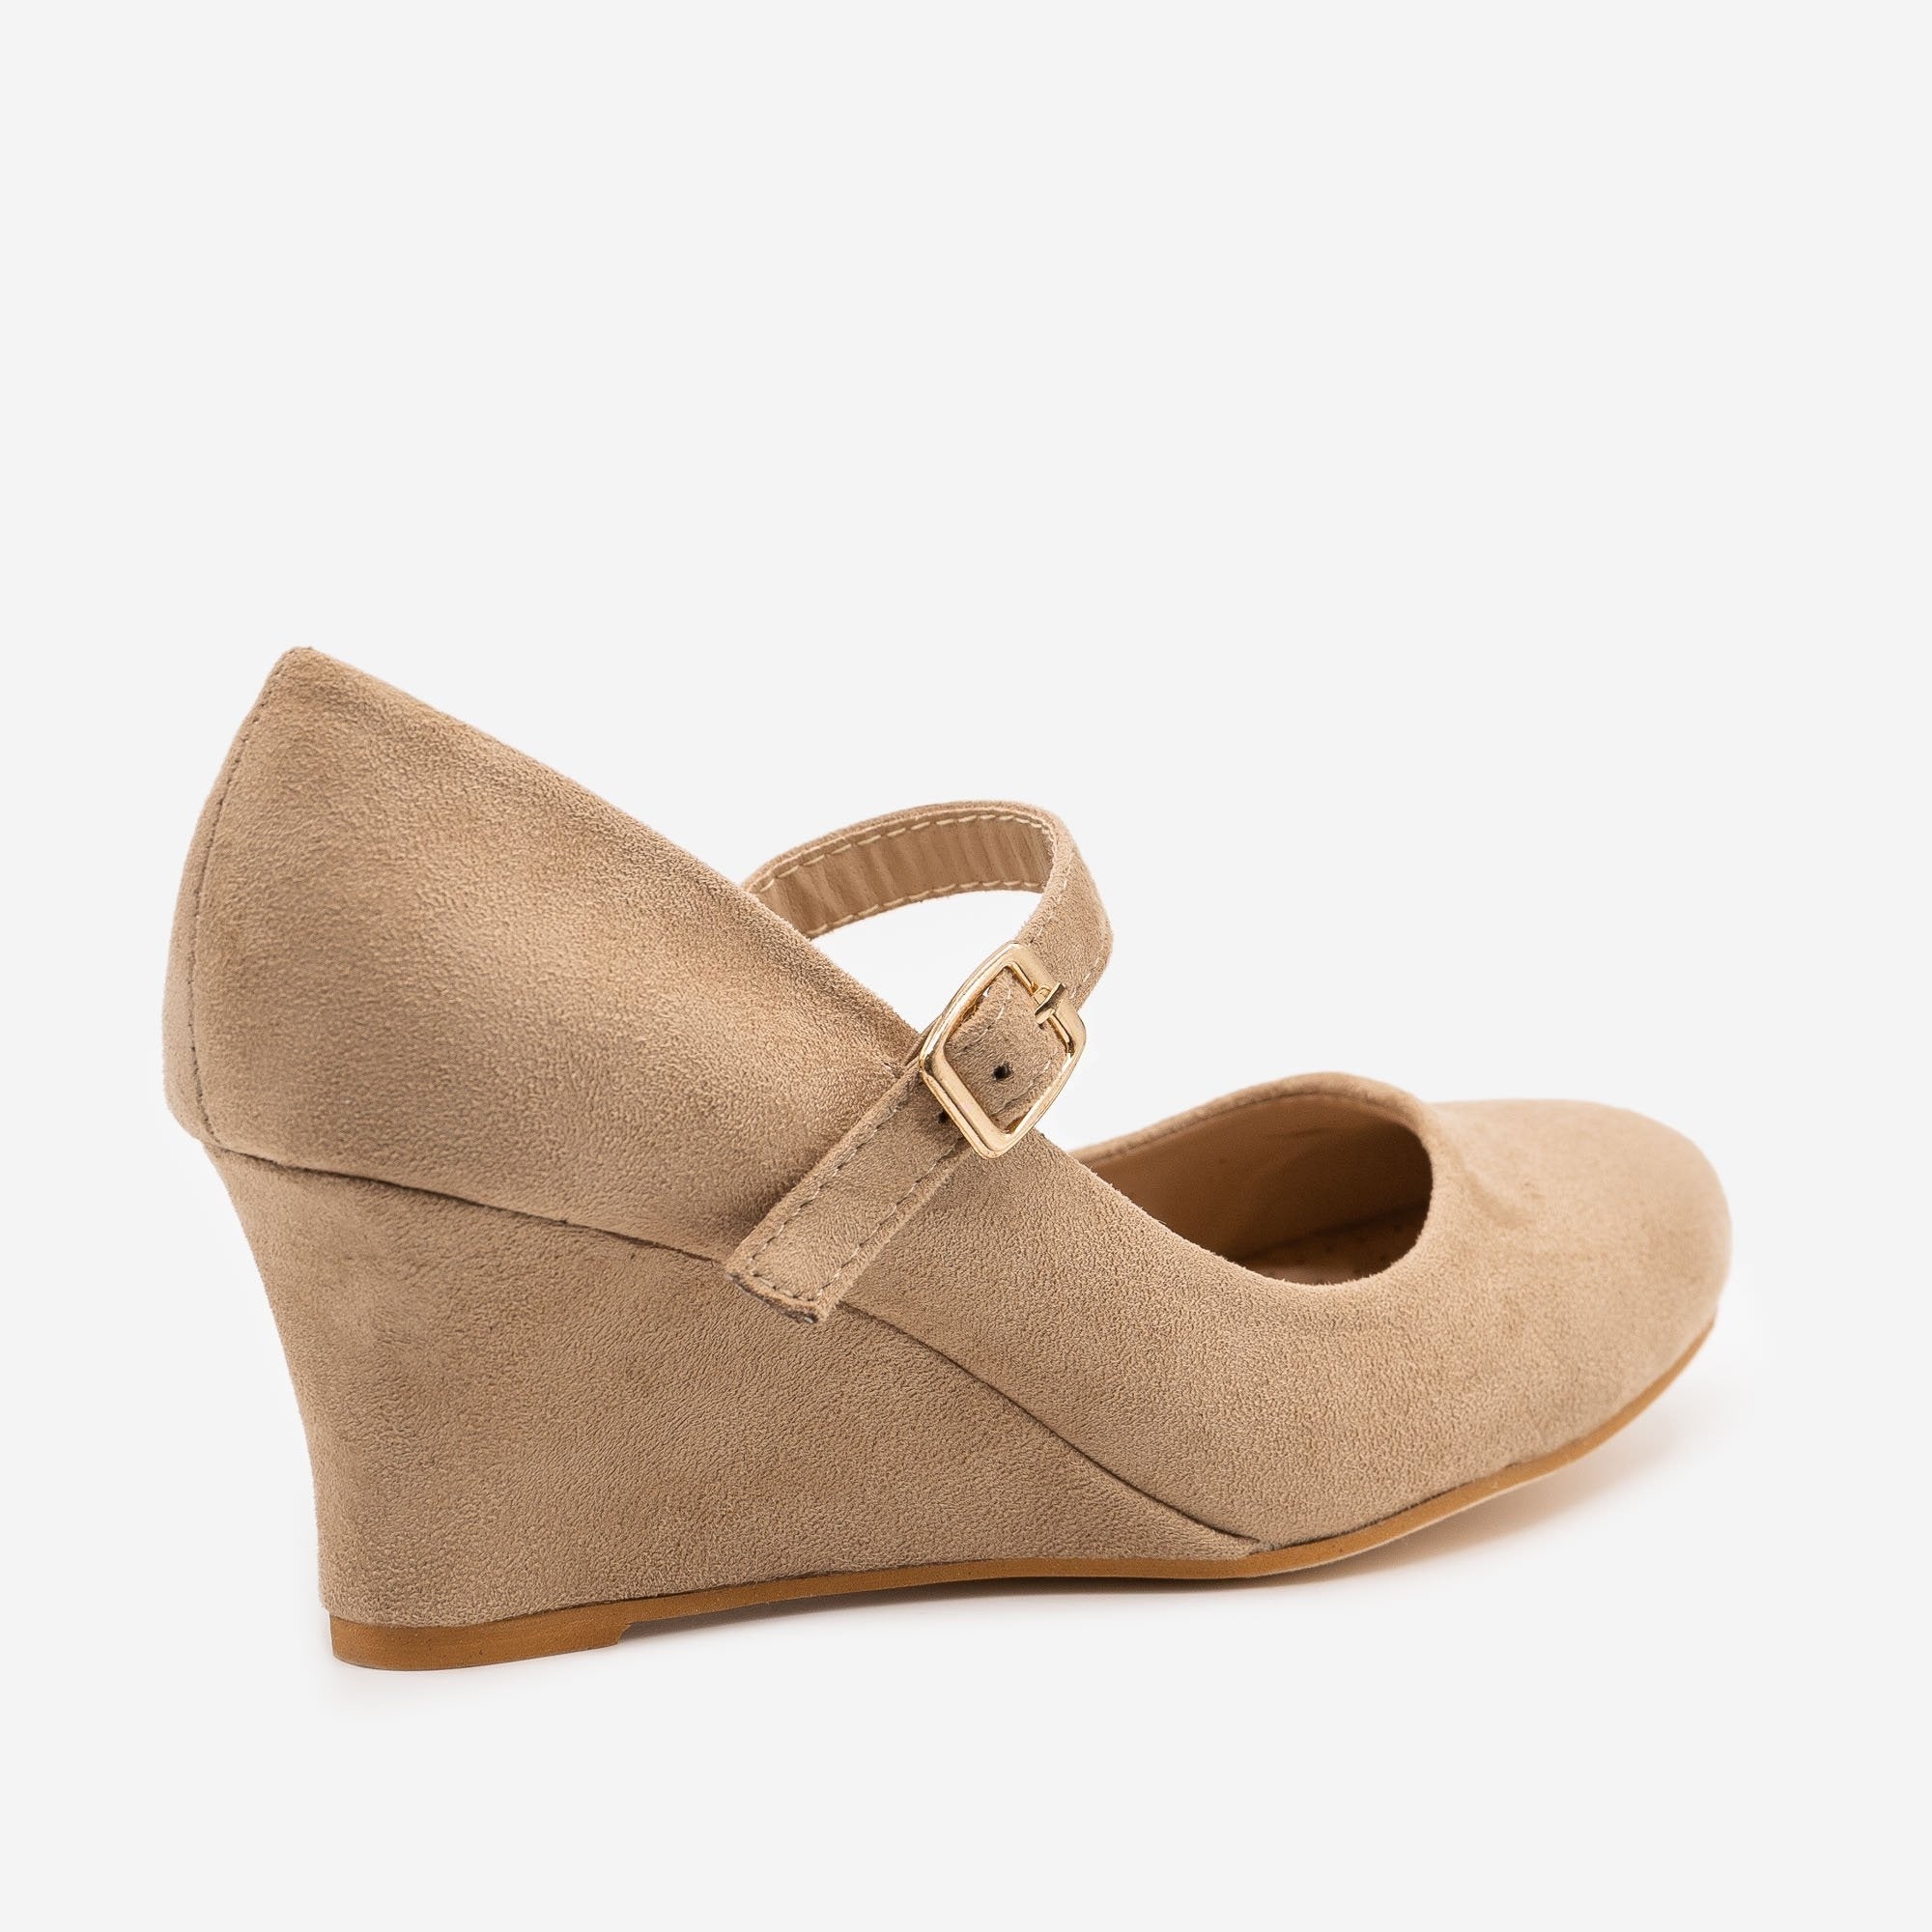 cute wedges for work